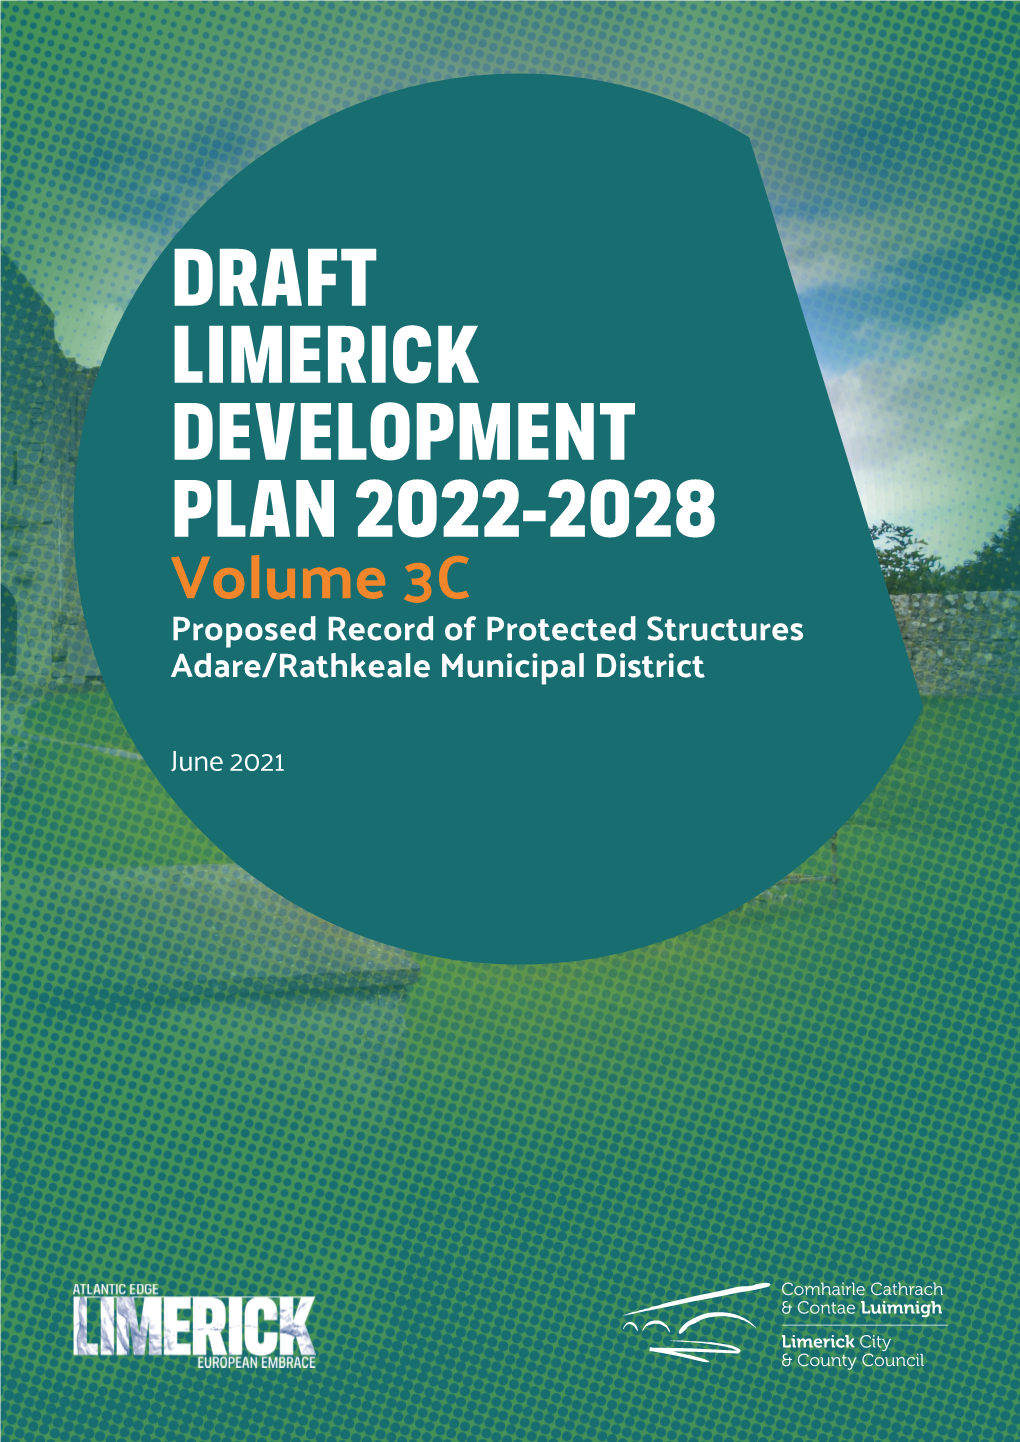 DRAFT LIMERICK DEVELOPMENT PLAN 2022-2028 Volume 3C Proposed Record of Protected Structures Adare/Rathkeale Municipal District